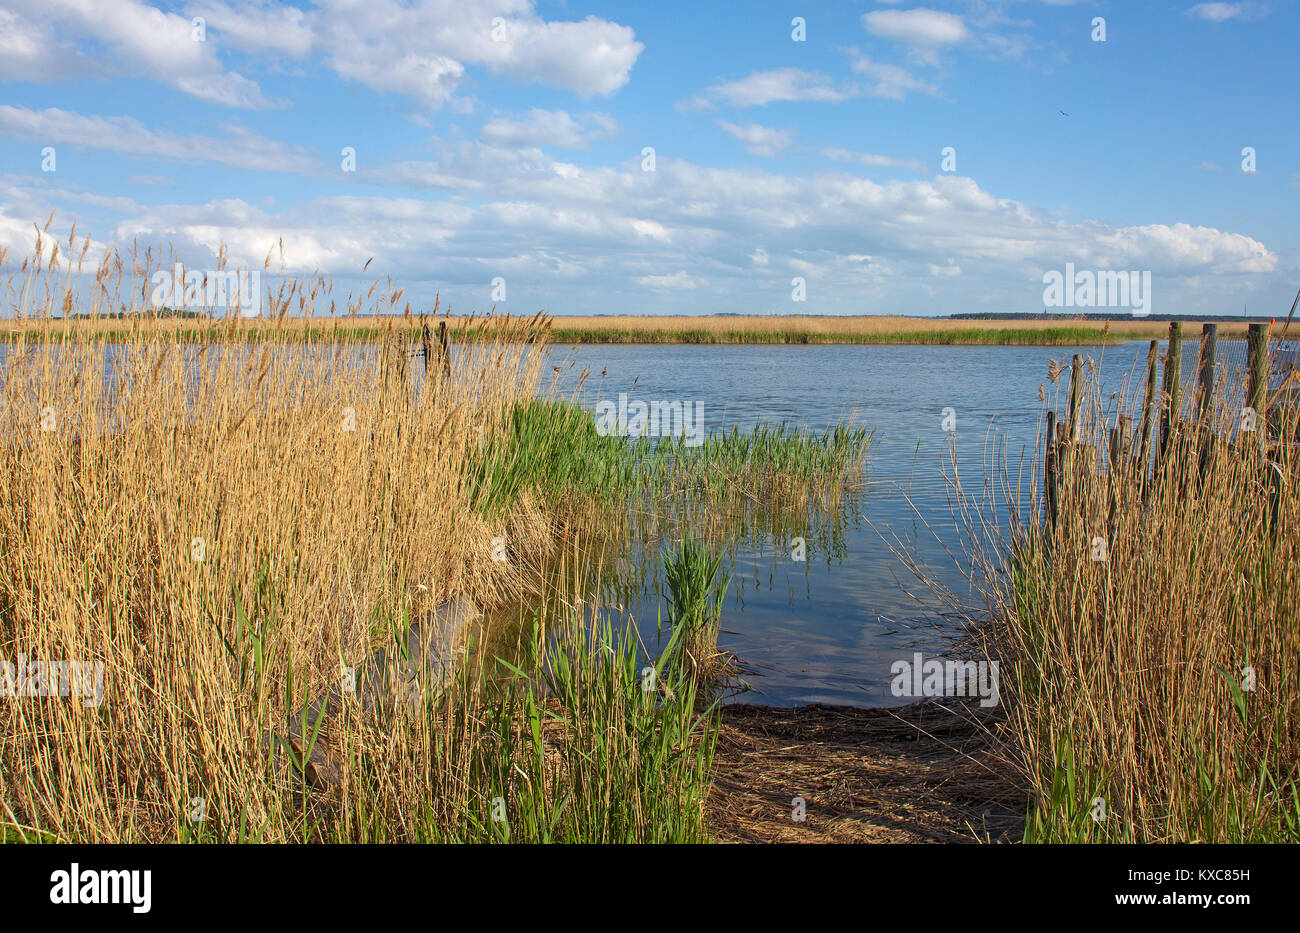 Bodden landscape at Zingster Strom, reed at shore, Zingst, Fishland, Mecklenburg-Western Pomerania, Baltic sea, Germany, Europe Stock Photo